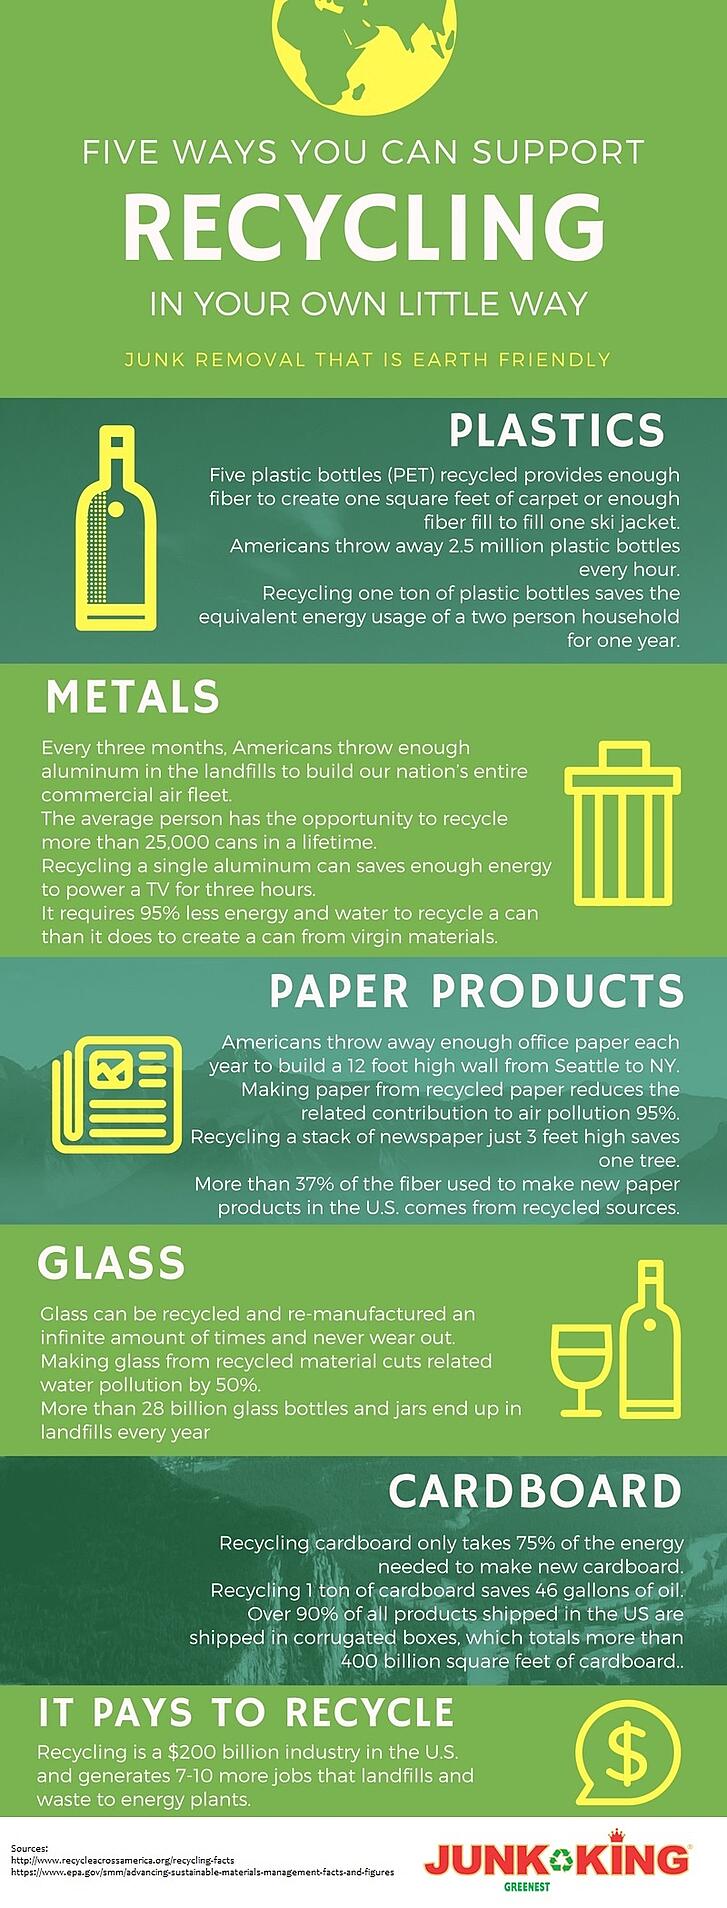 Plastic Bottle Recycling & Packaging Facts Infographic | Visual.ly